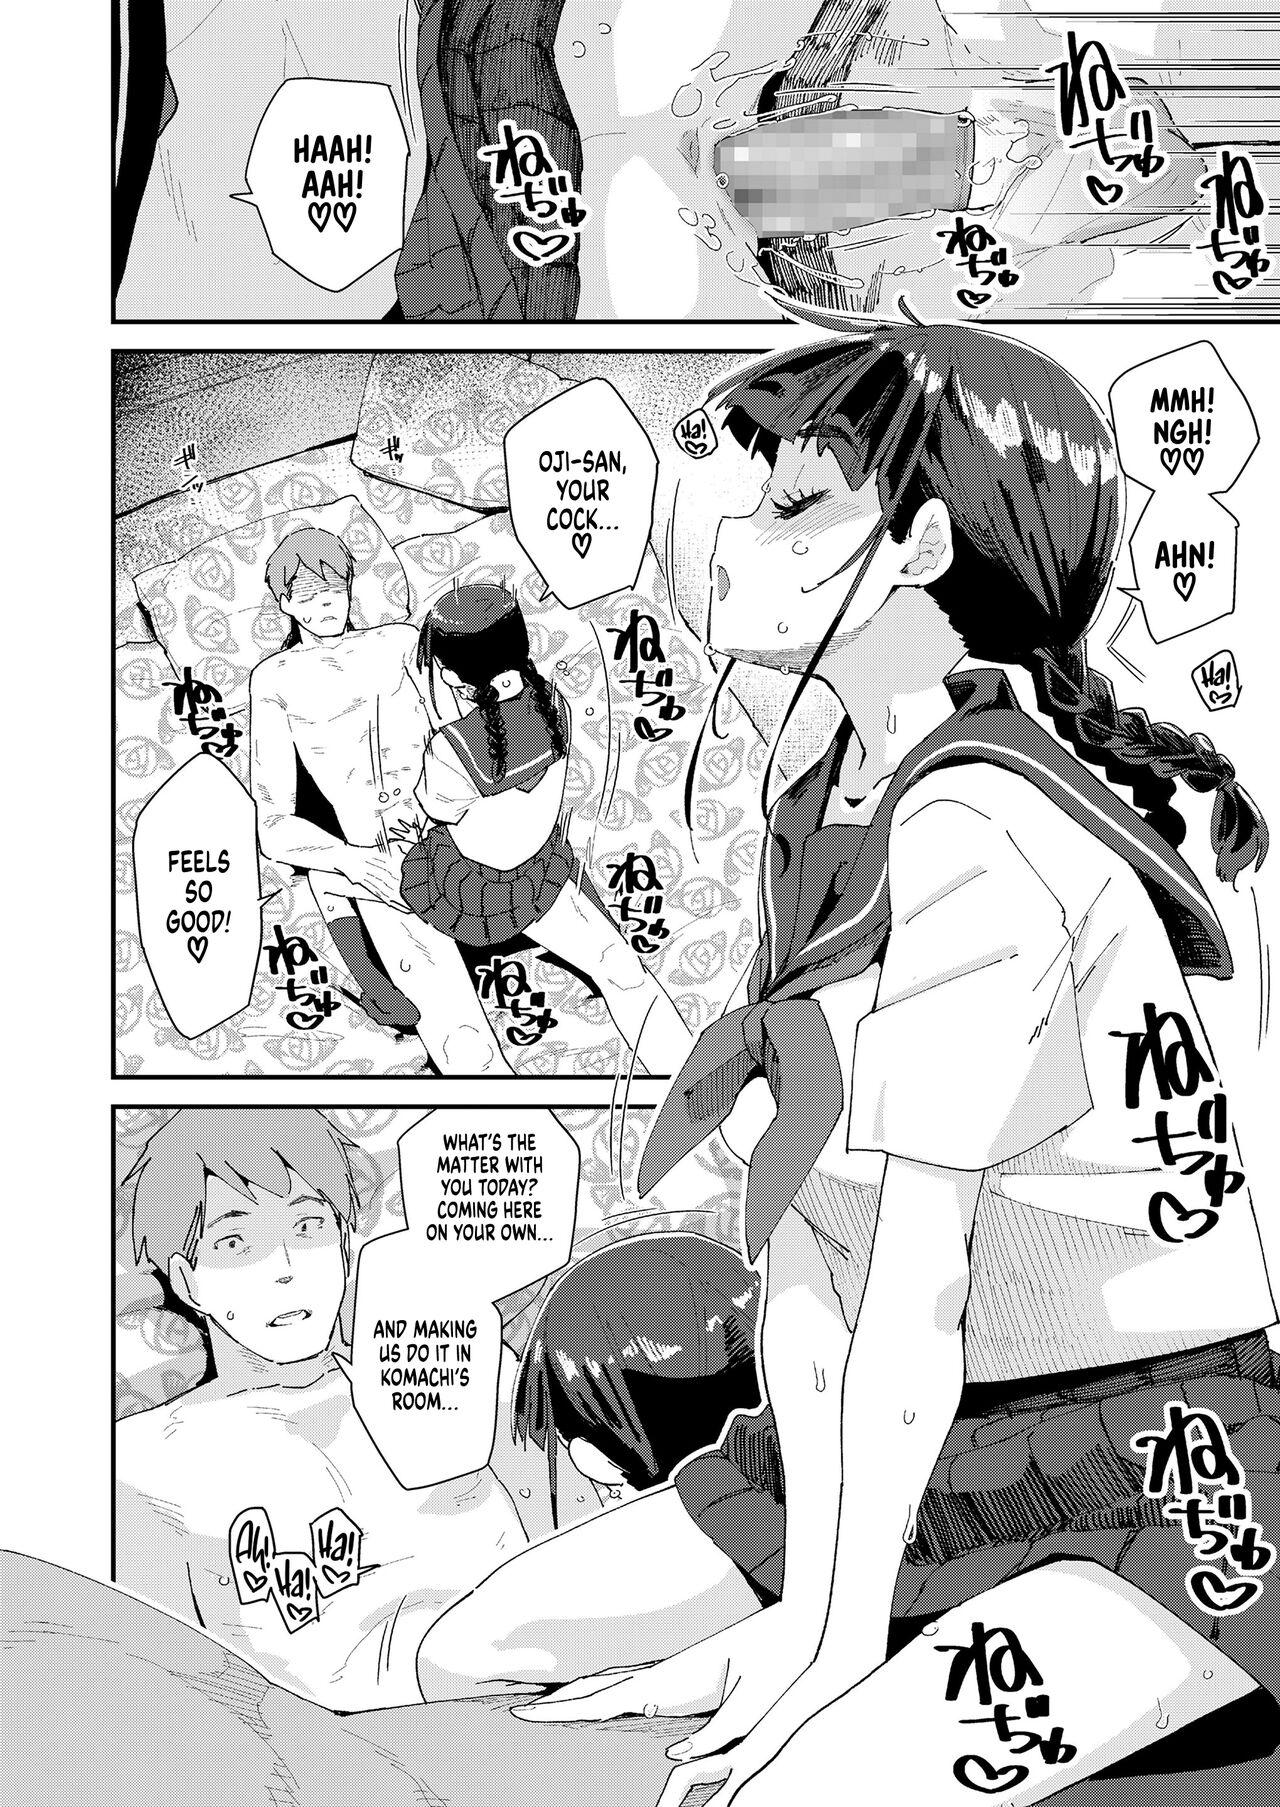 Student Mitsu to Chou 3 | Nectar & Butterfly 3 Stockings - Page 4